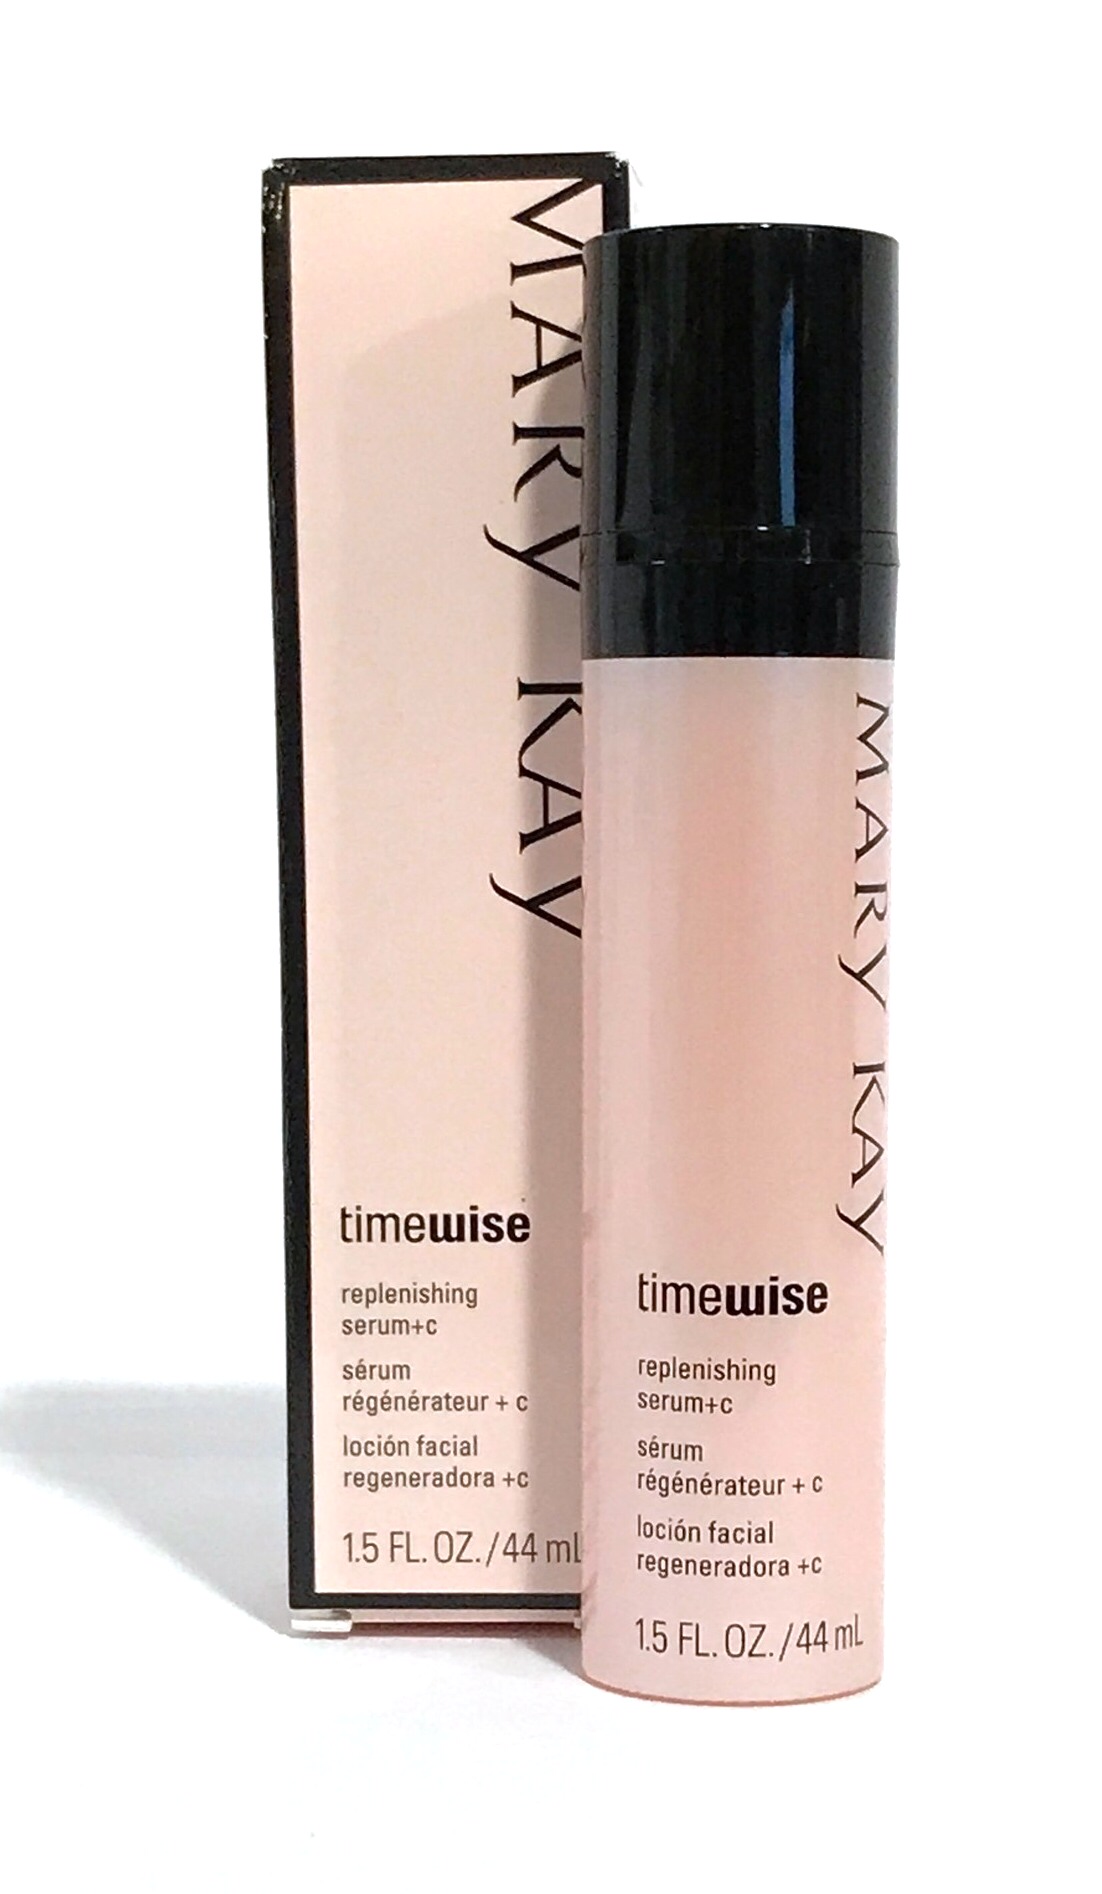 Mary Kay Skin Care :: Timewise :: Replenishing Serum +C - Discount Mary